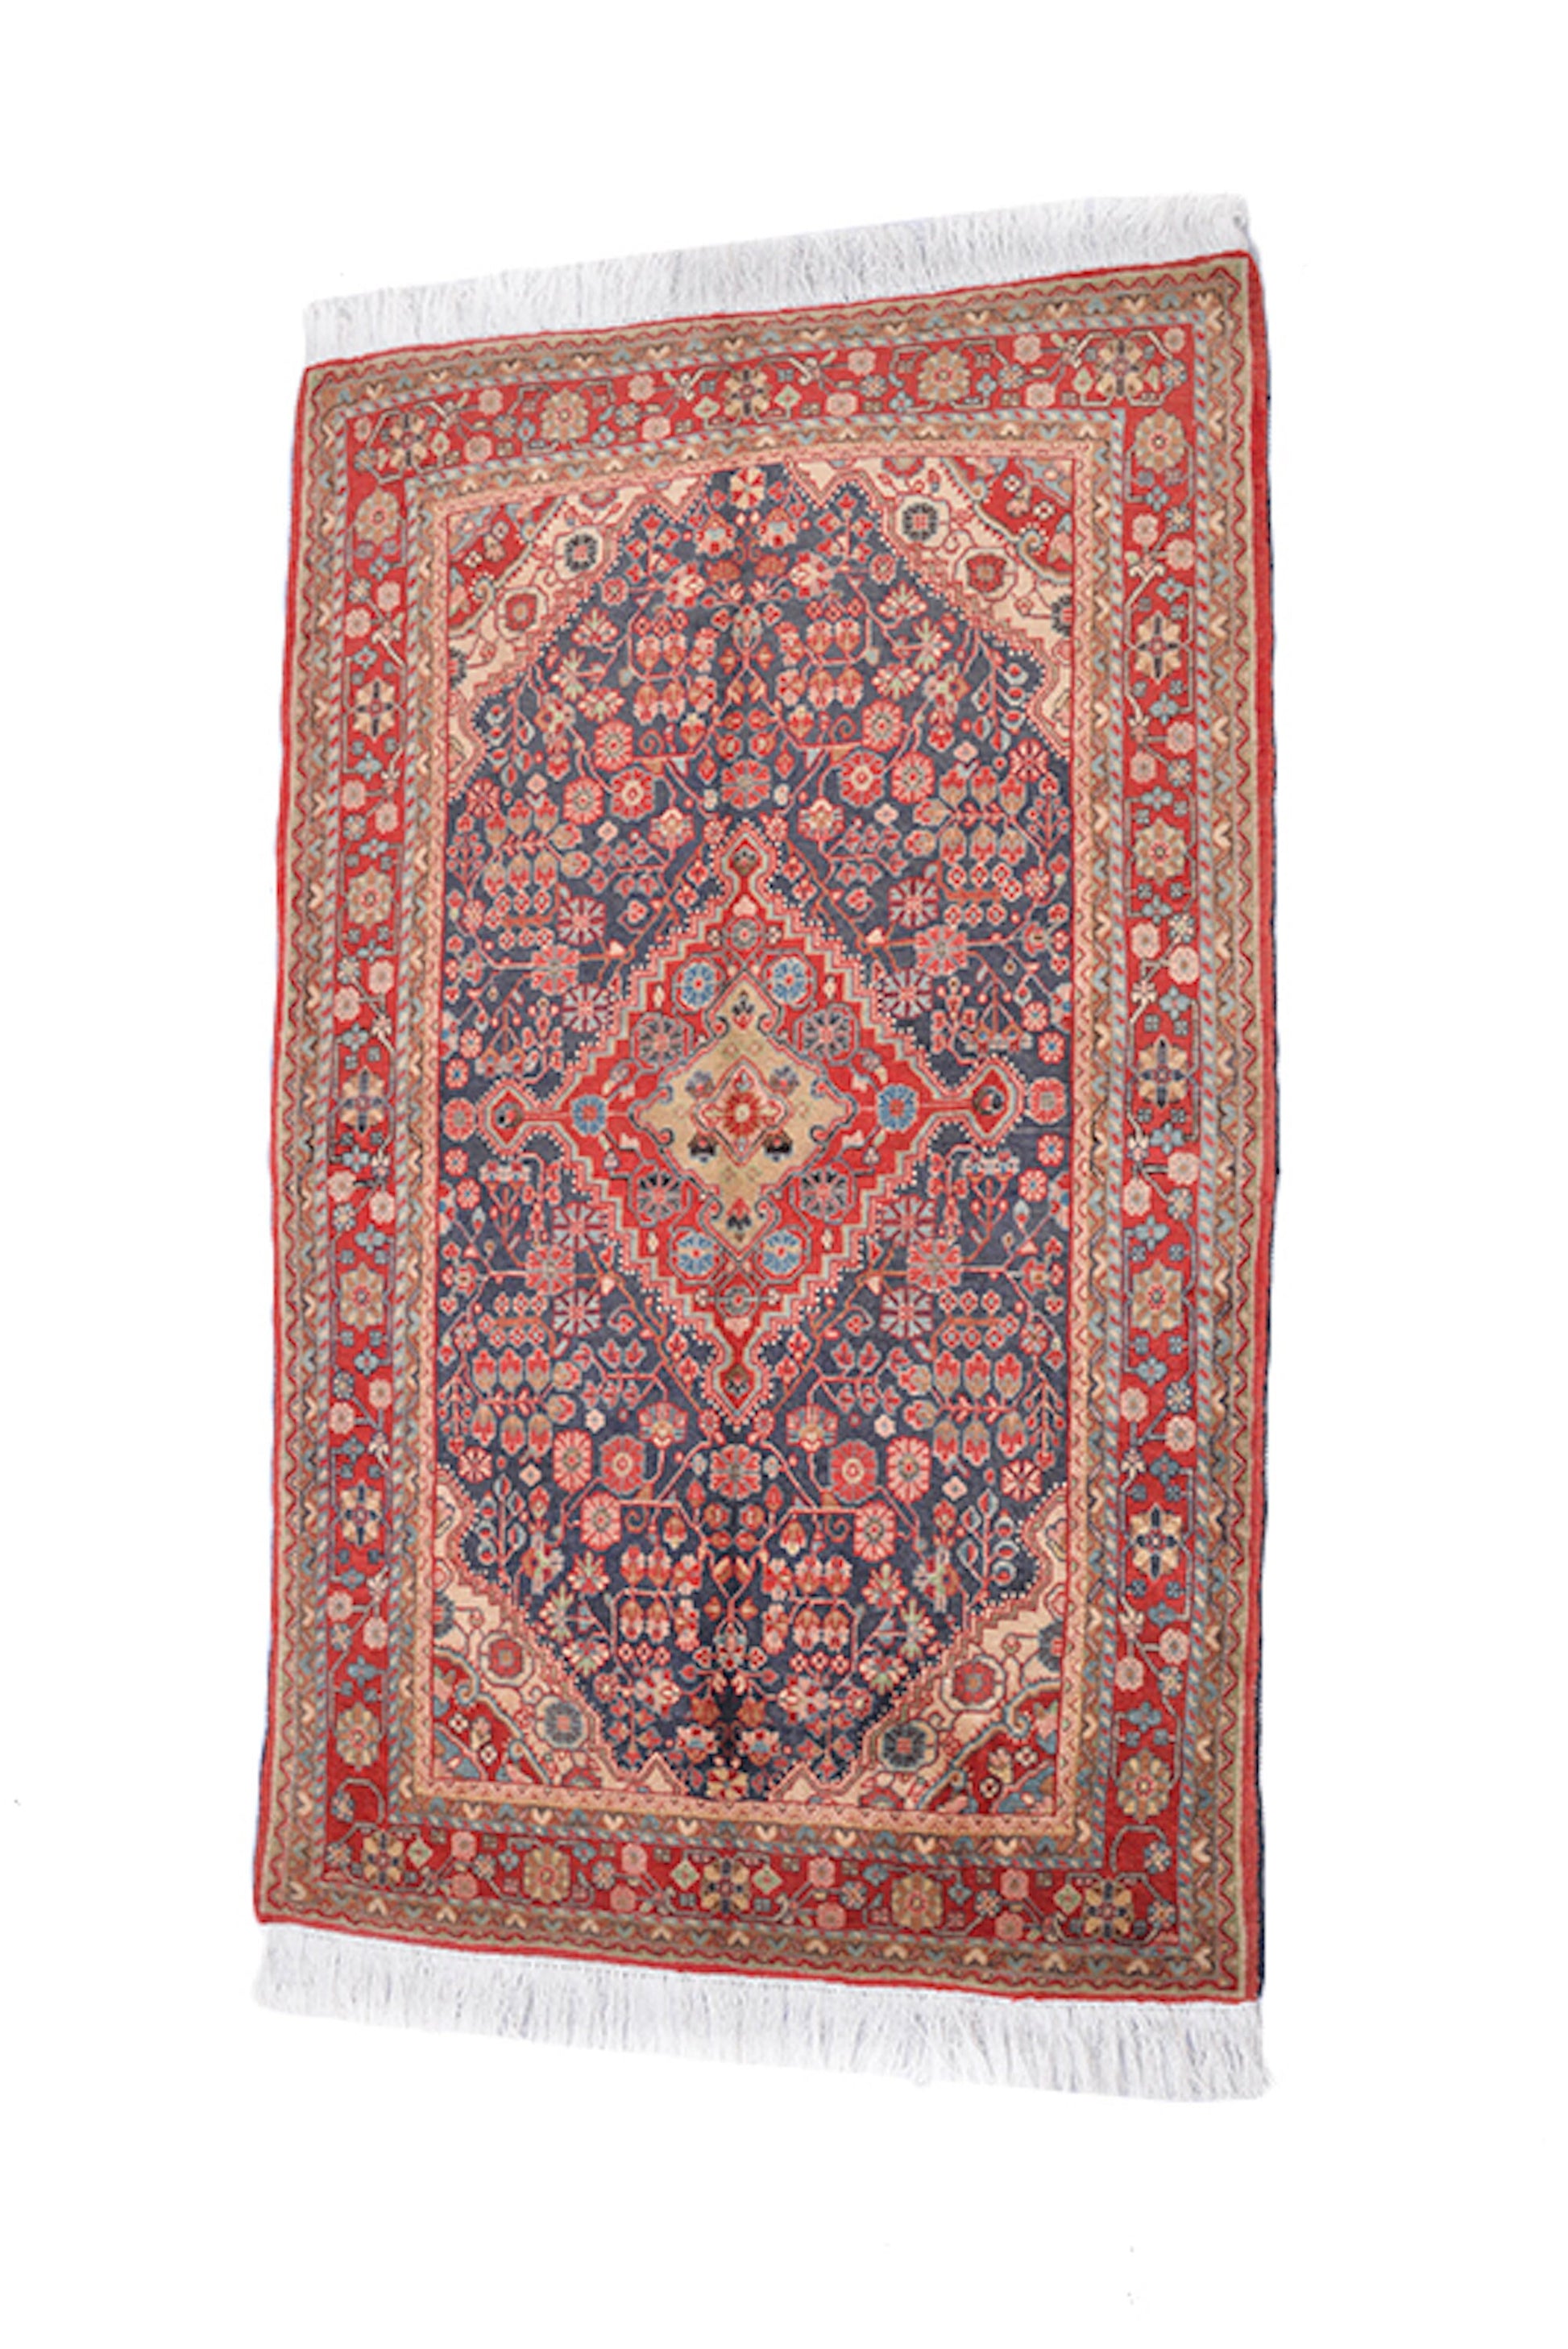 4 x 6 Colorful Rug with Central Medallion and Geometric Floral Border | Hand Woven with Dyed Wool